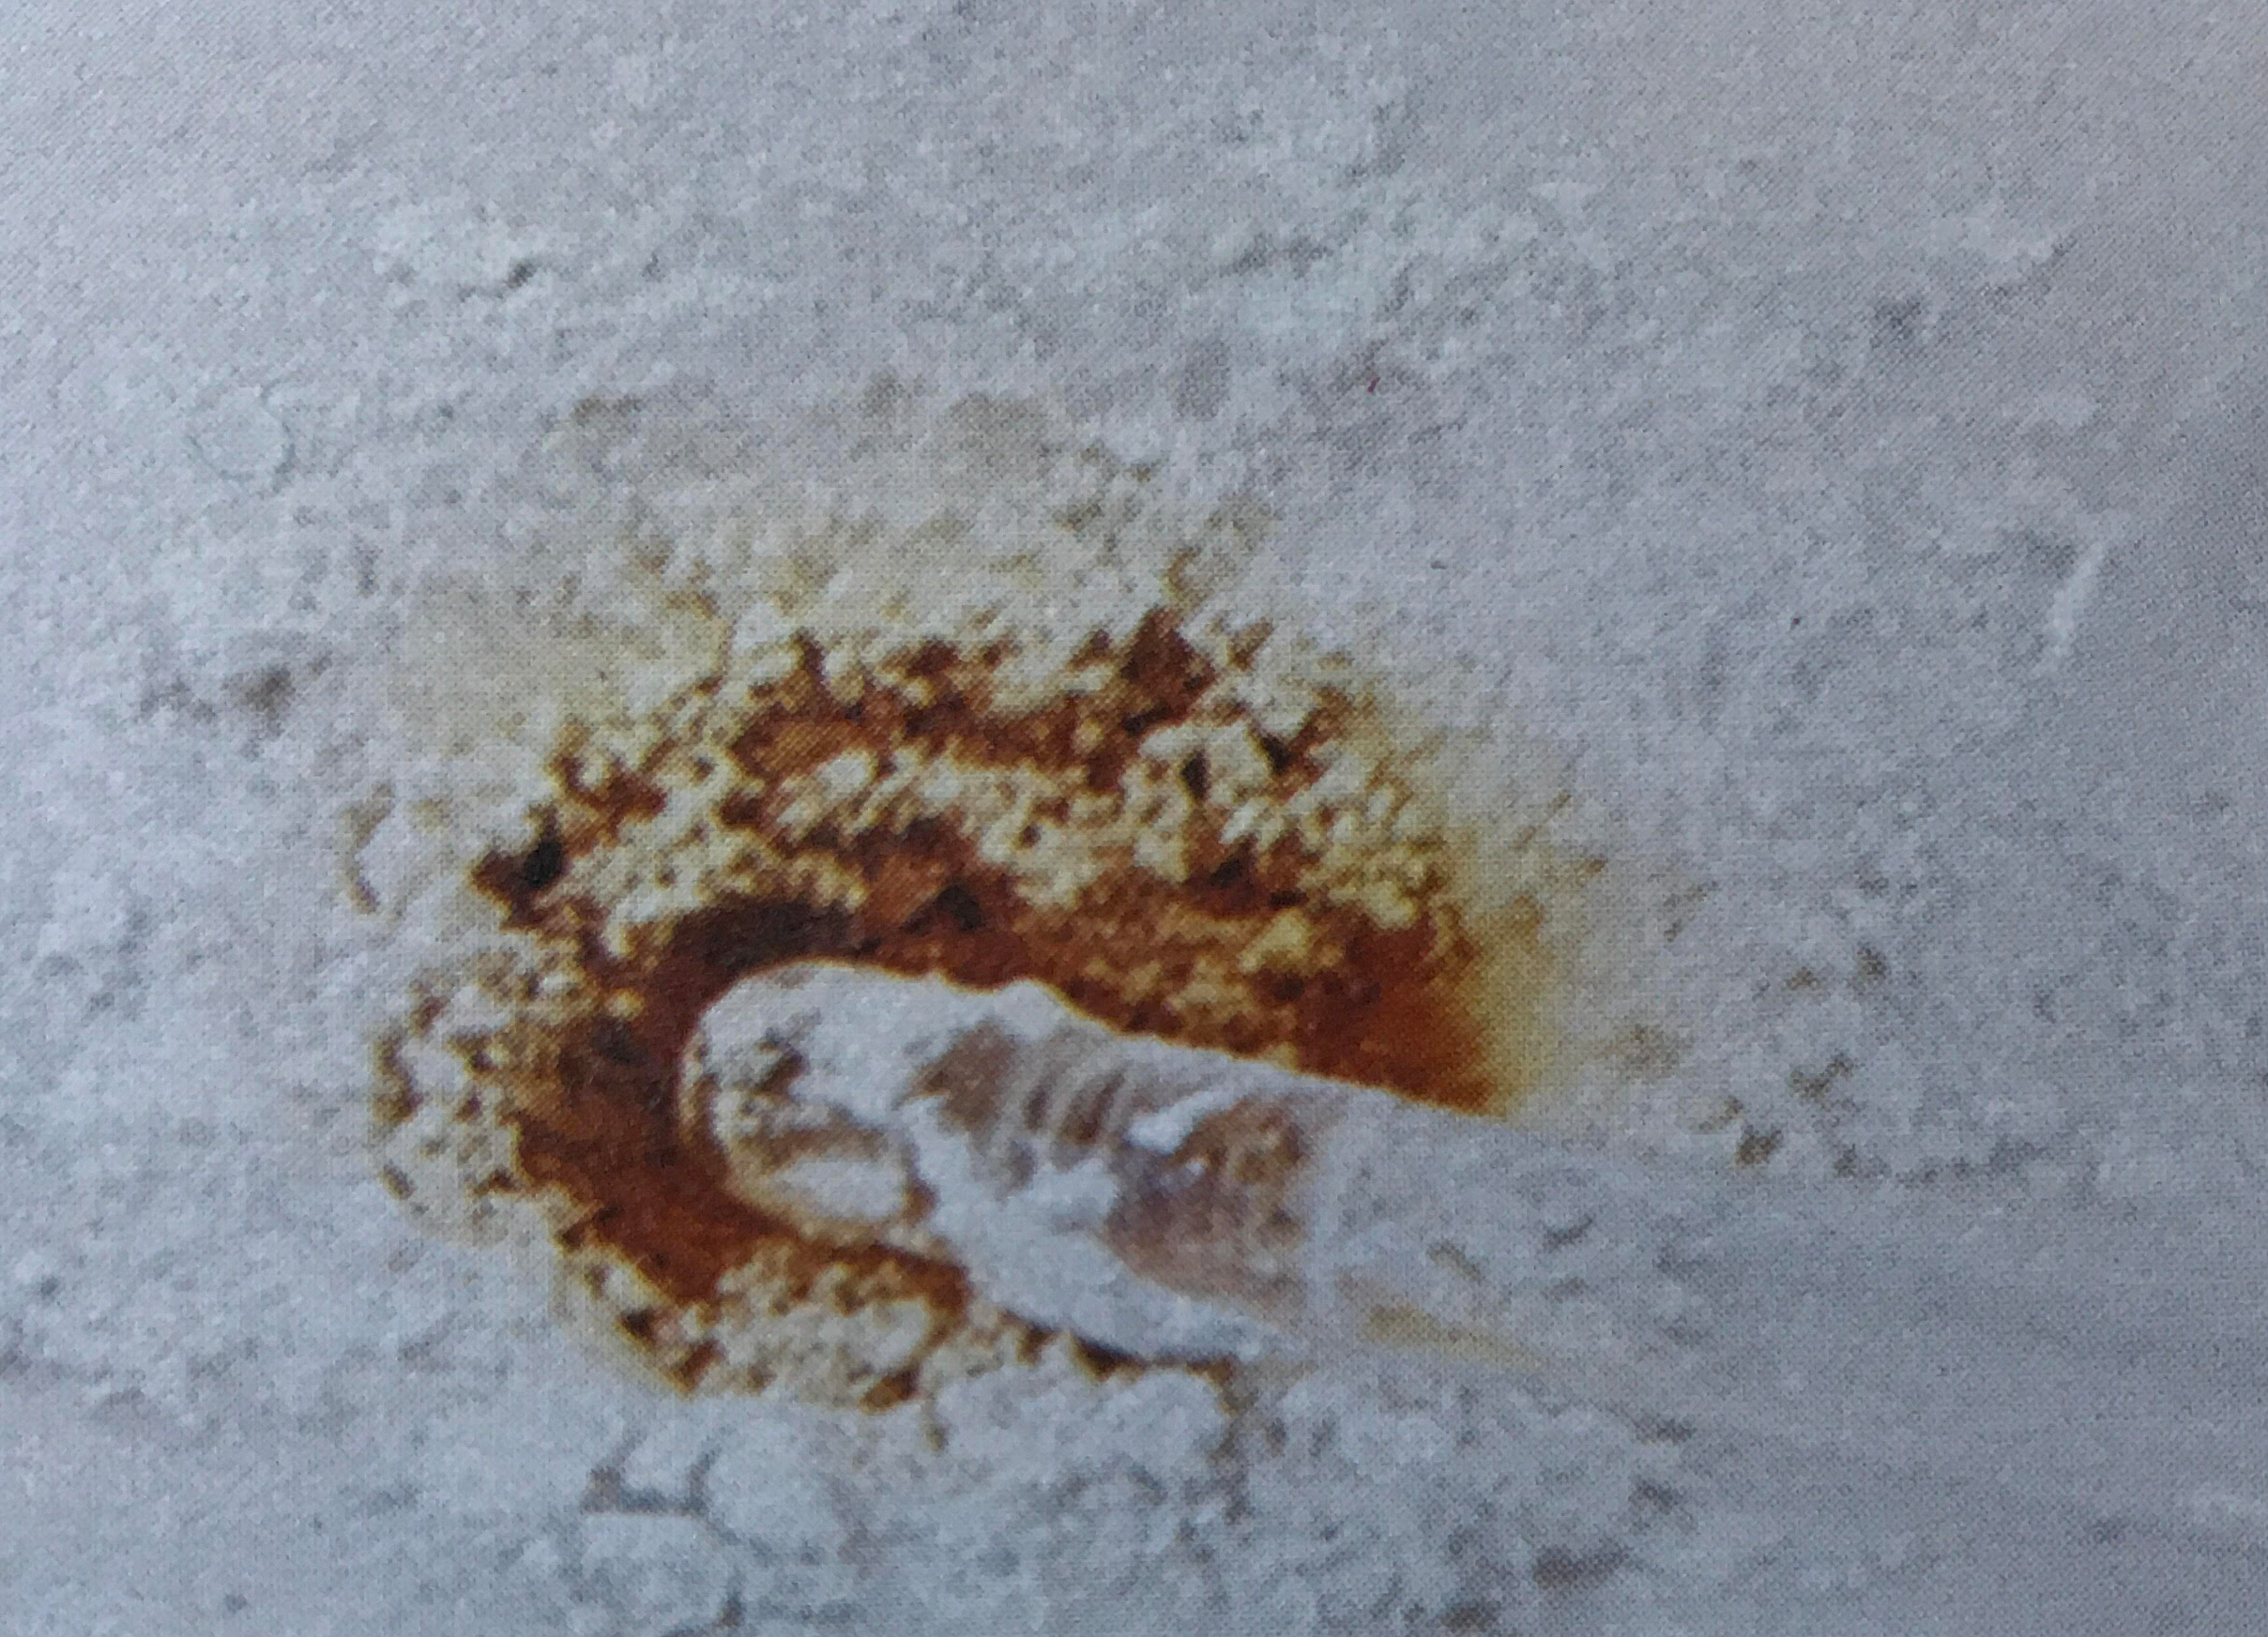 Scattered white powder with circular brown residue in the center.